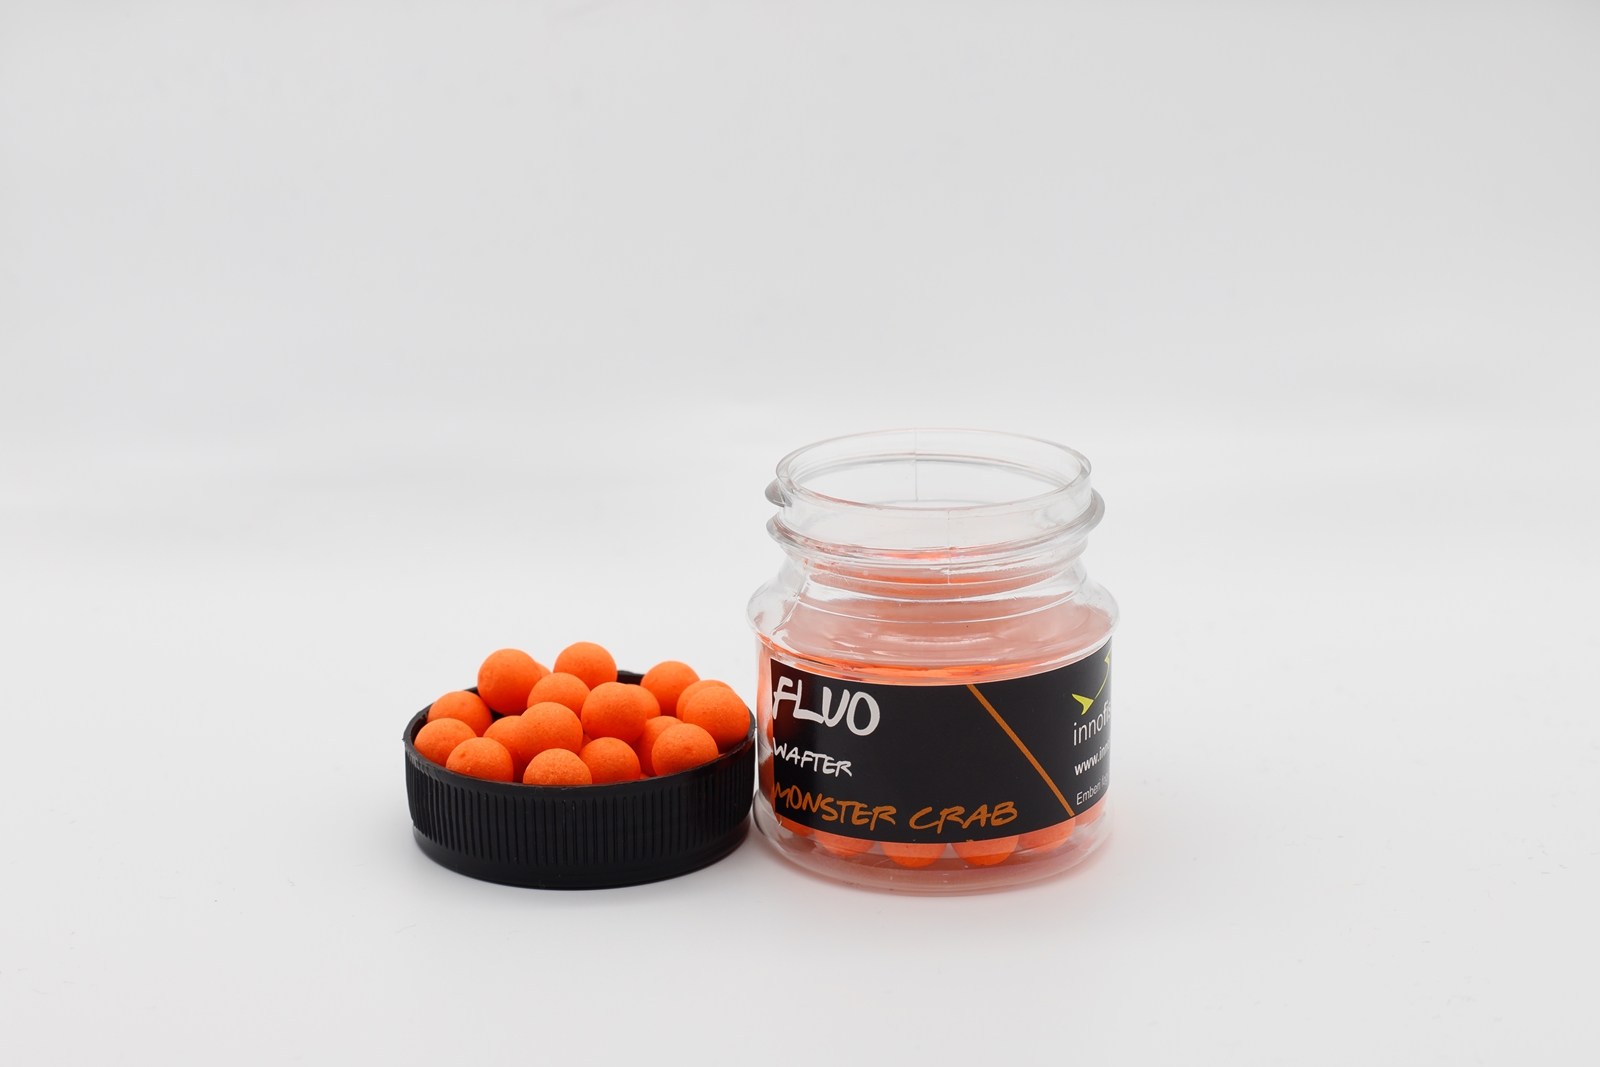 Fluo Wafter 8-10 mm  - monster crab, 20 g